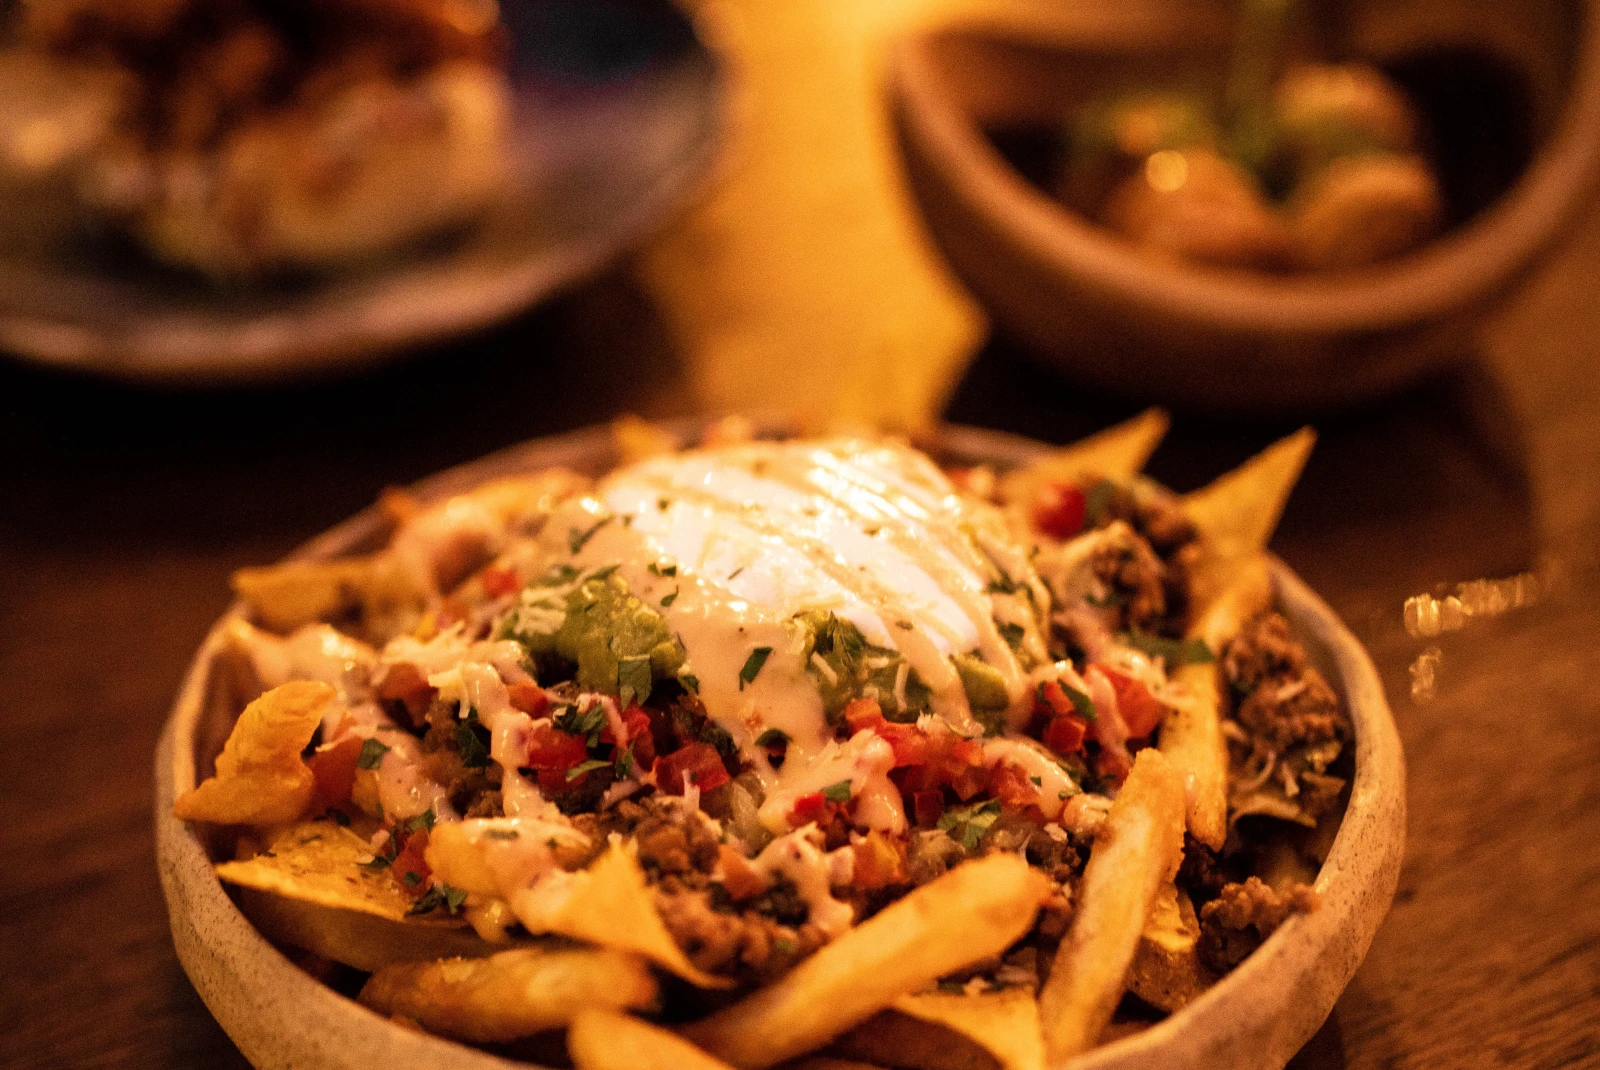 Bowl of fries with toppings on wooden table